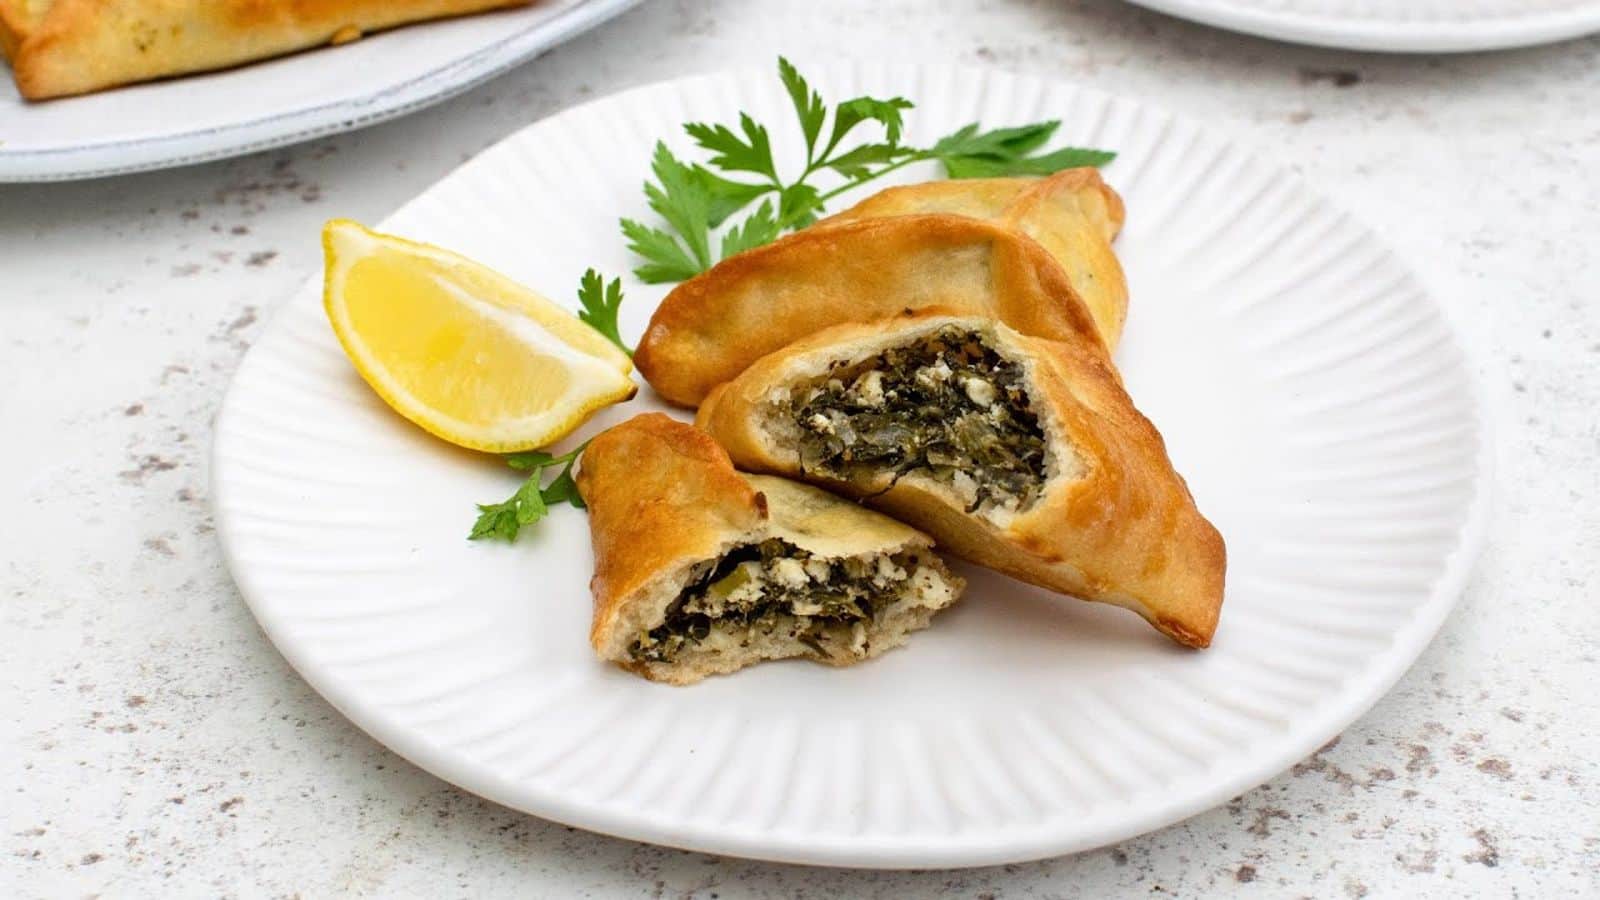 Your guests will love this Lebanese spinach fatayer recipe